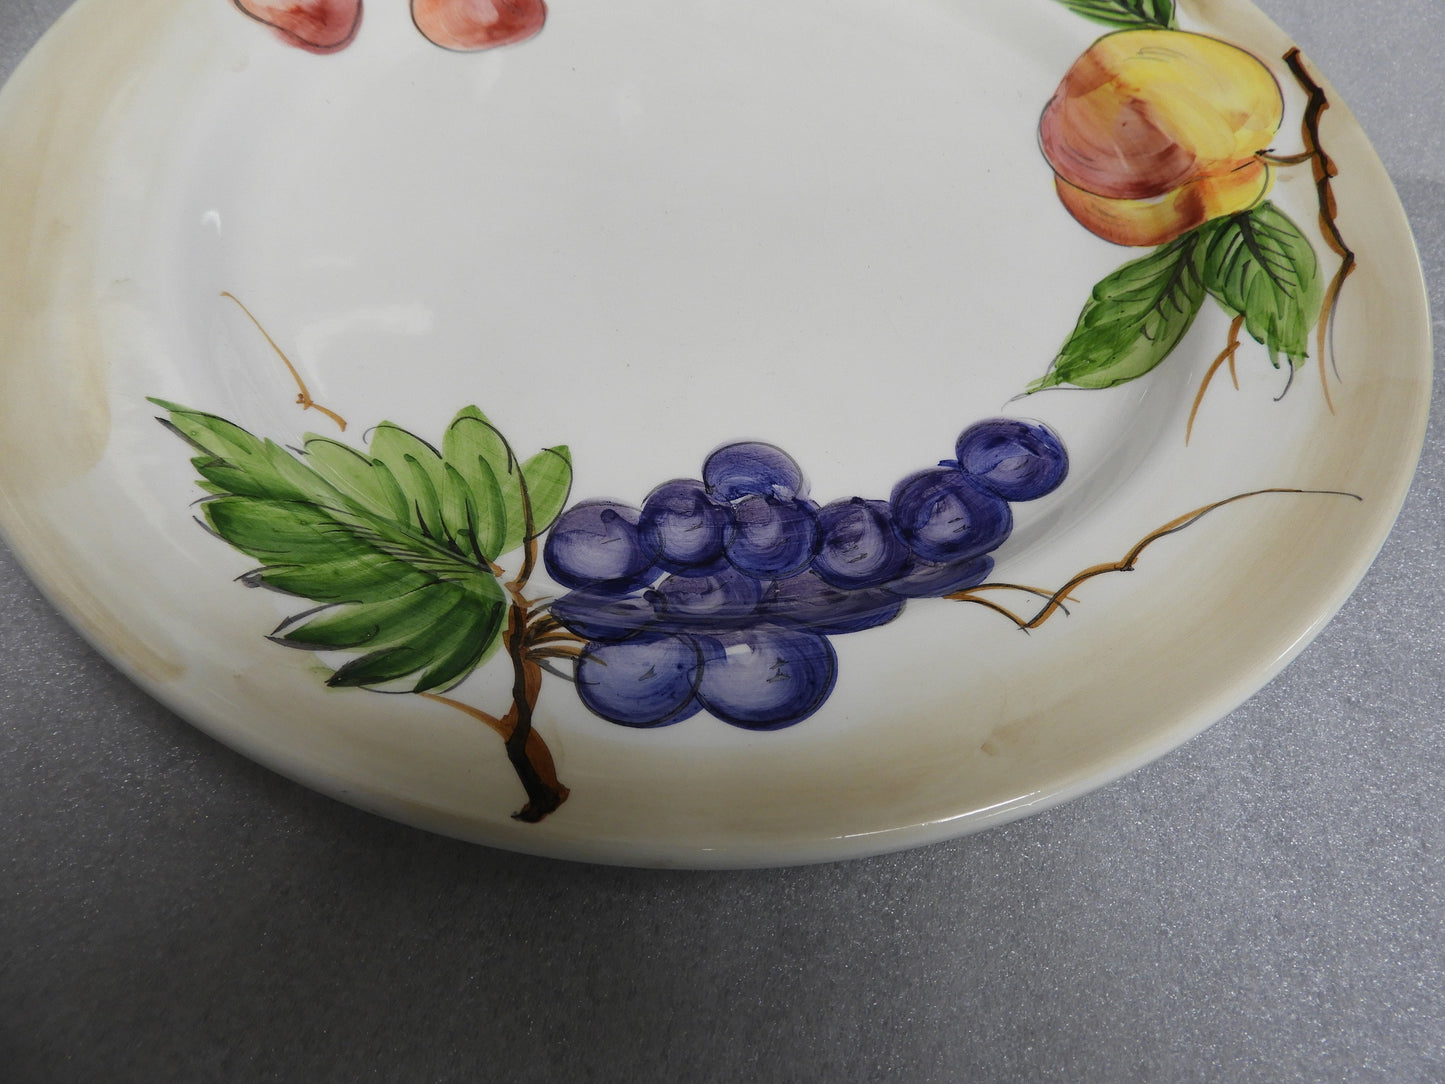 11" CRATE & BARREL BY ANCORA HAND PAINTED DINNER PLATE ITALY